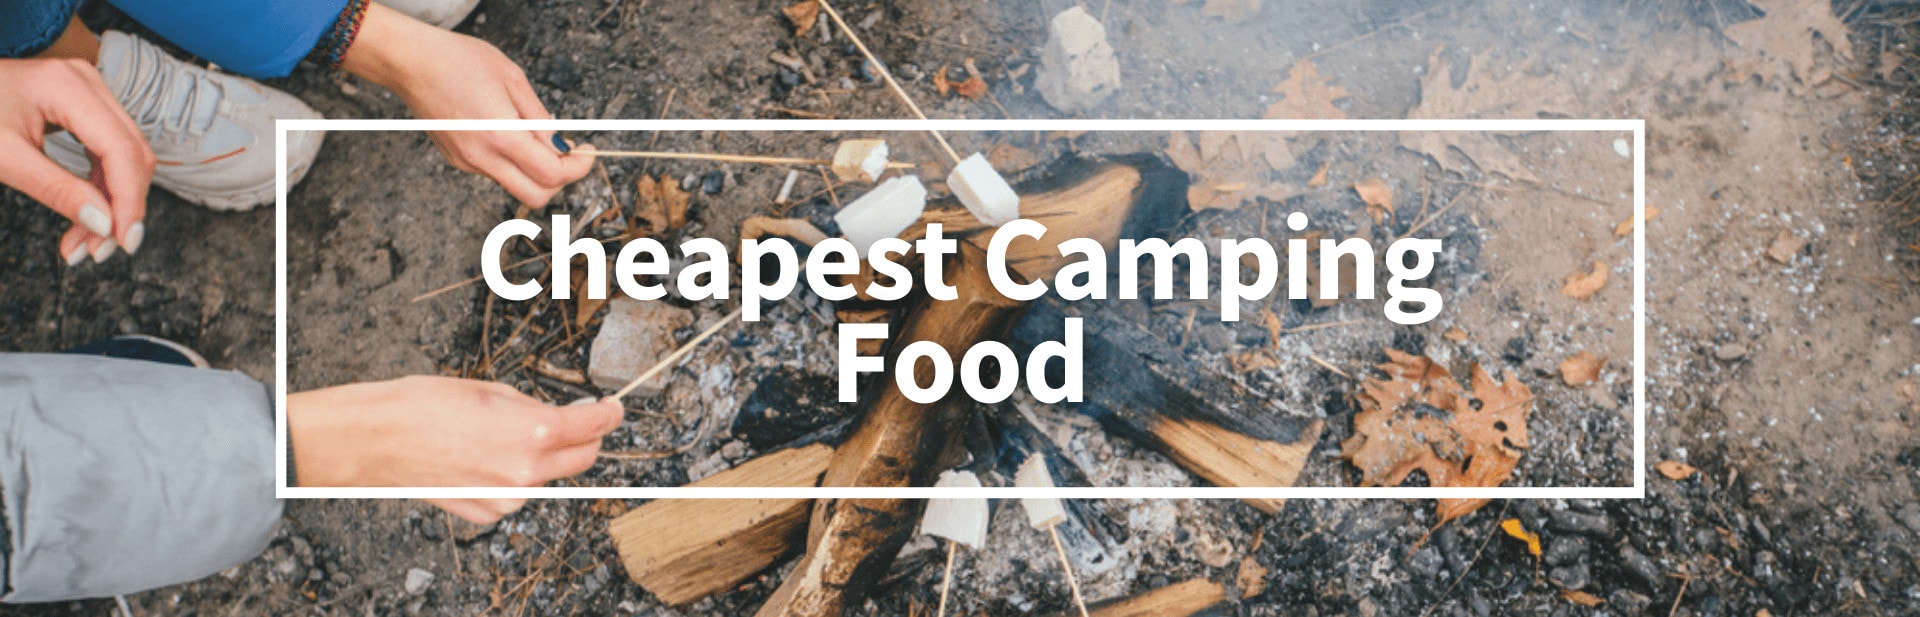 The 14 Cheapest Camping Food Options For Adventures On A Budget